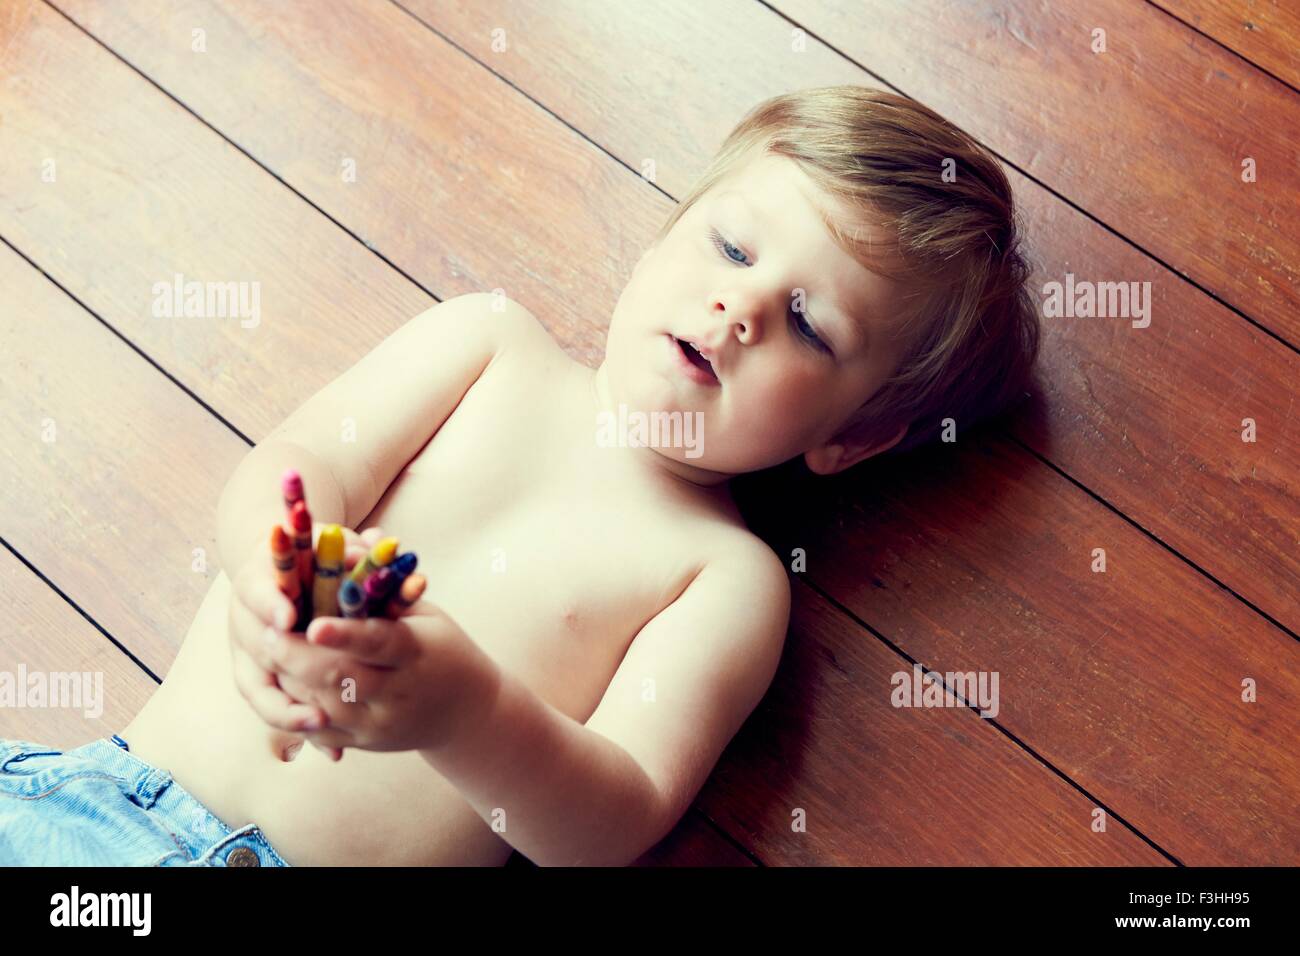 High angle view of boy lying on back on wooden floor holding crayons Stock Photo